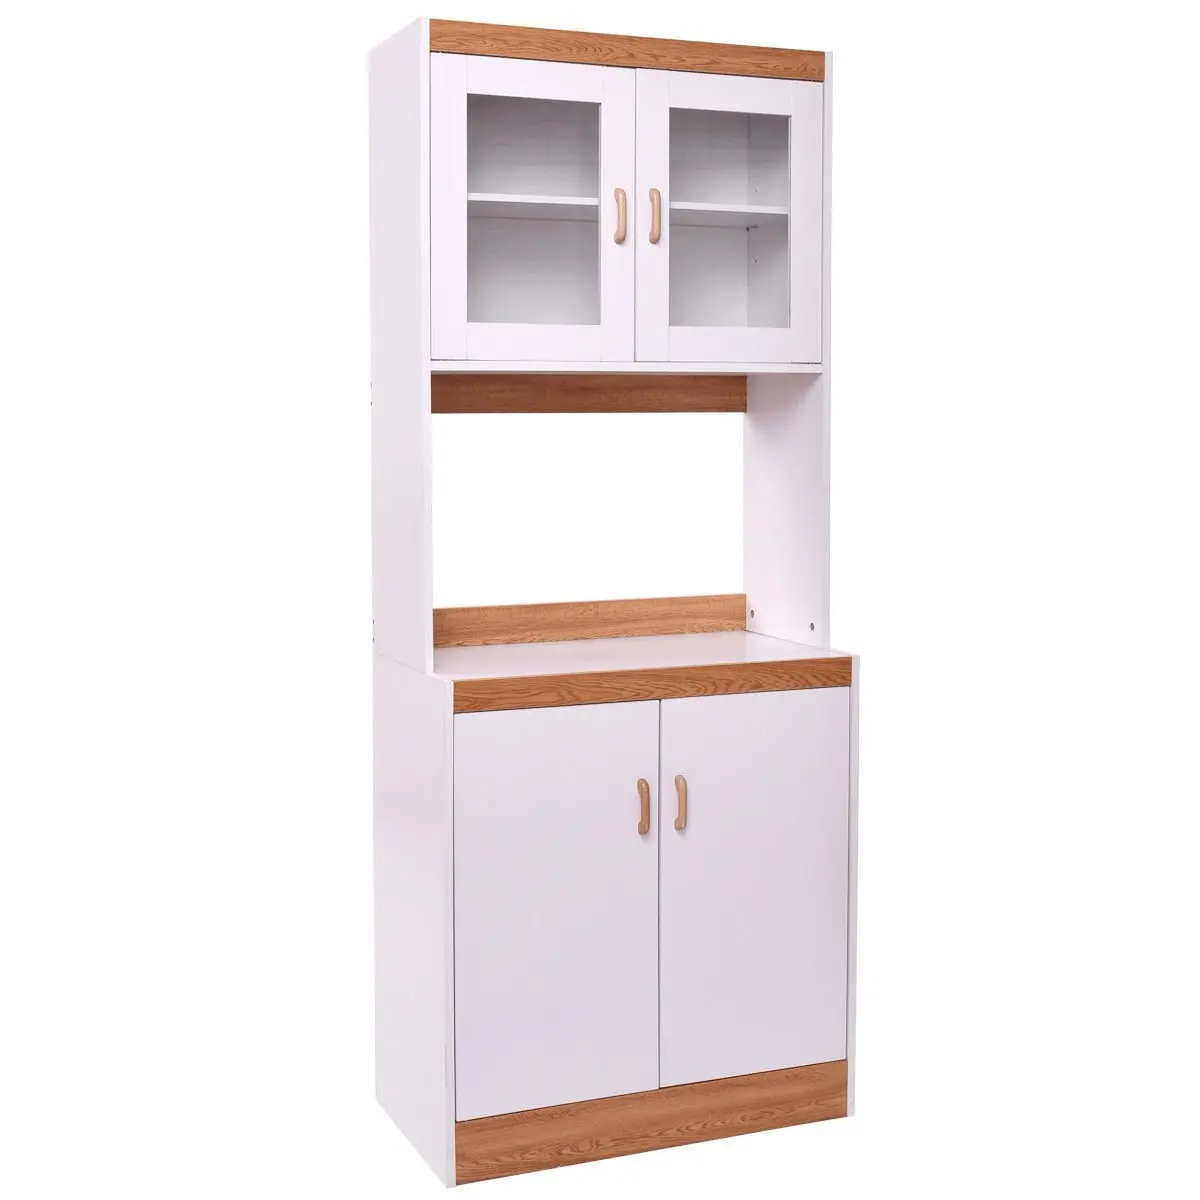 Cheap Tall White Pantry Cabinet, find Tall White Pantry Cabinet deals on line at Alibaba.com